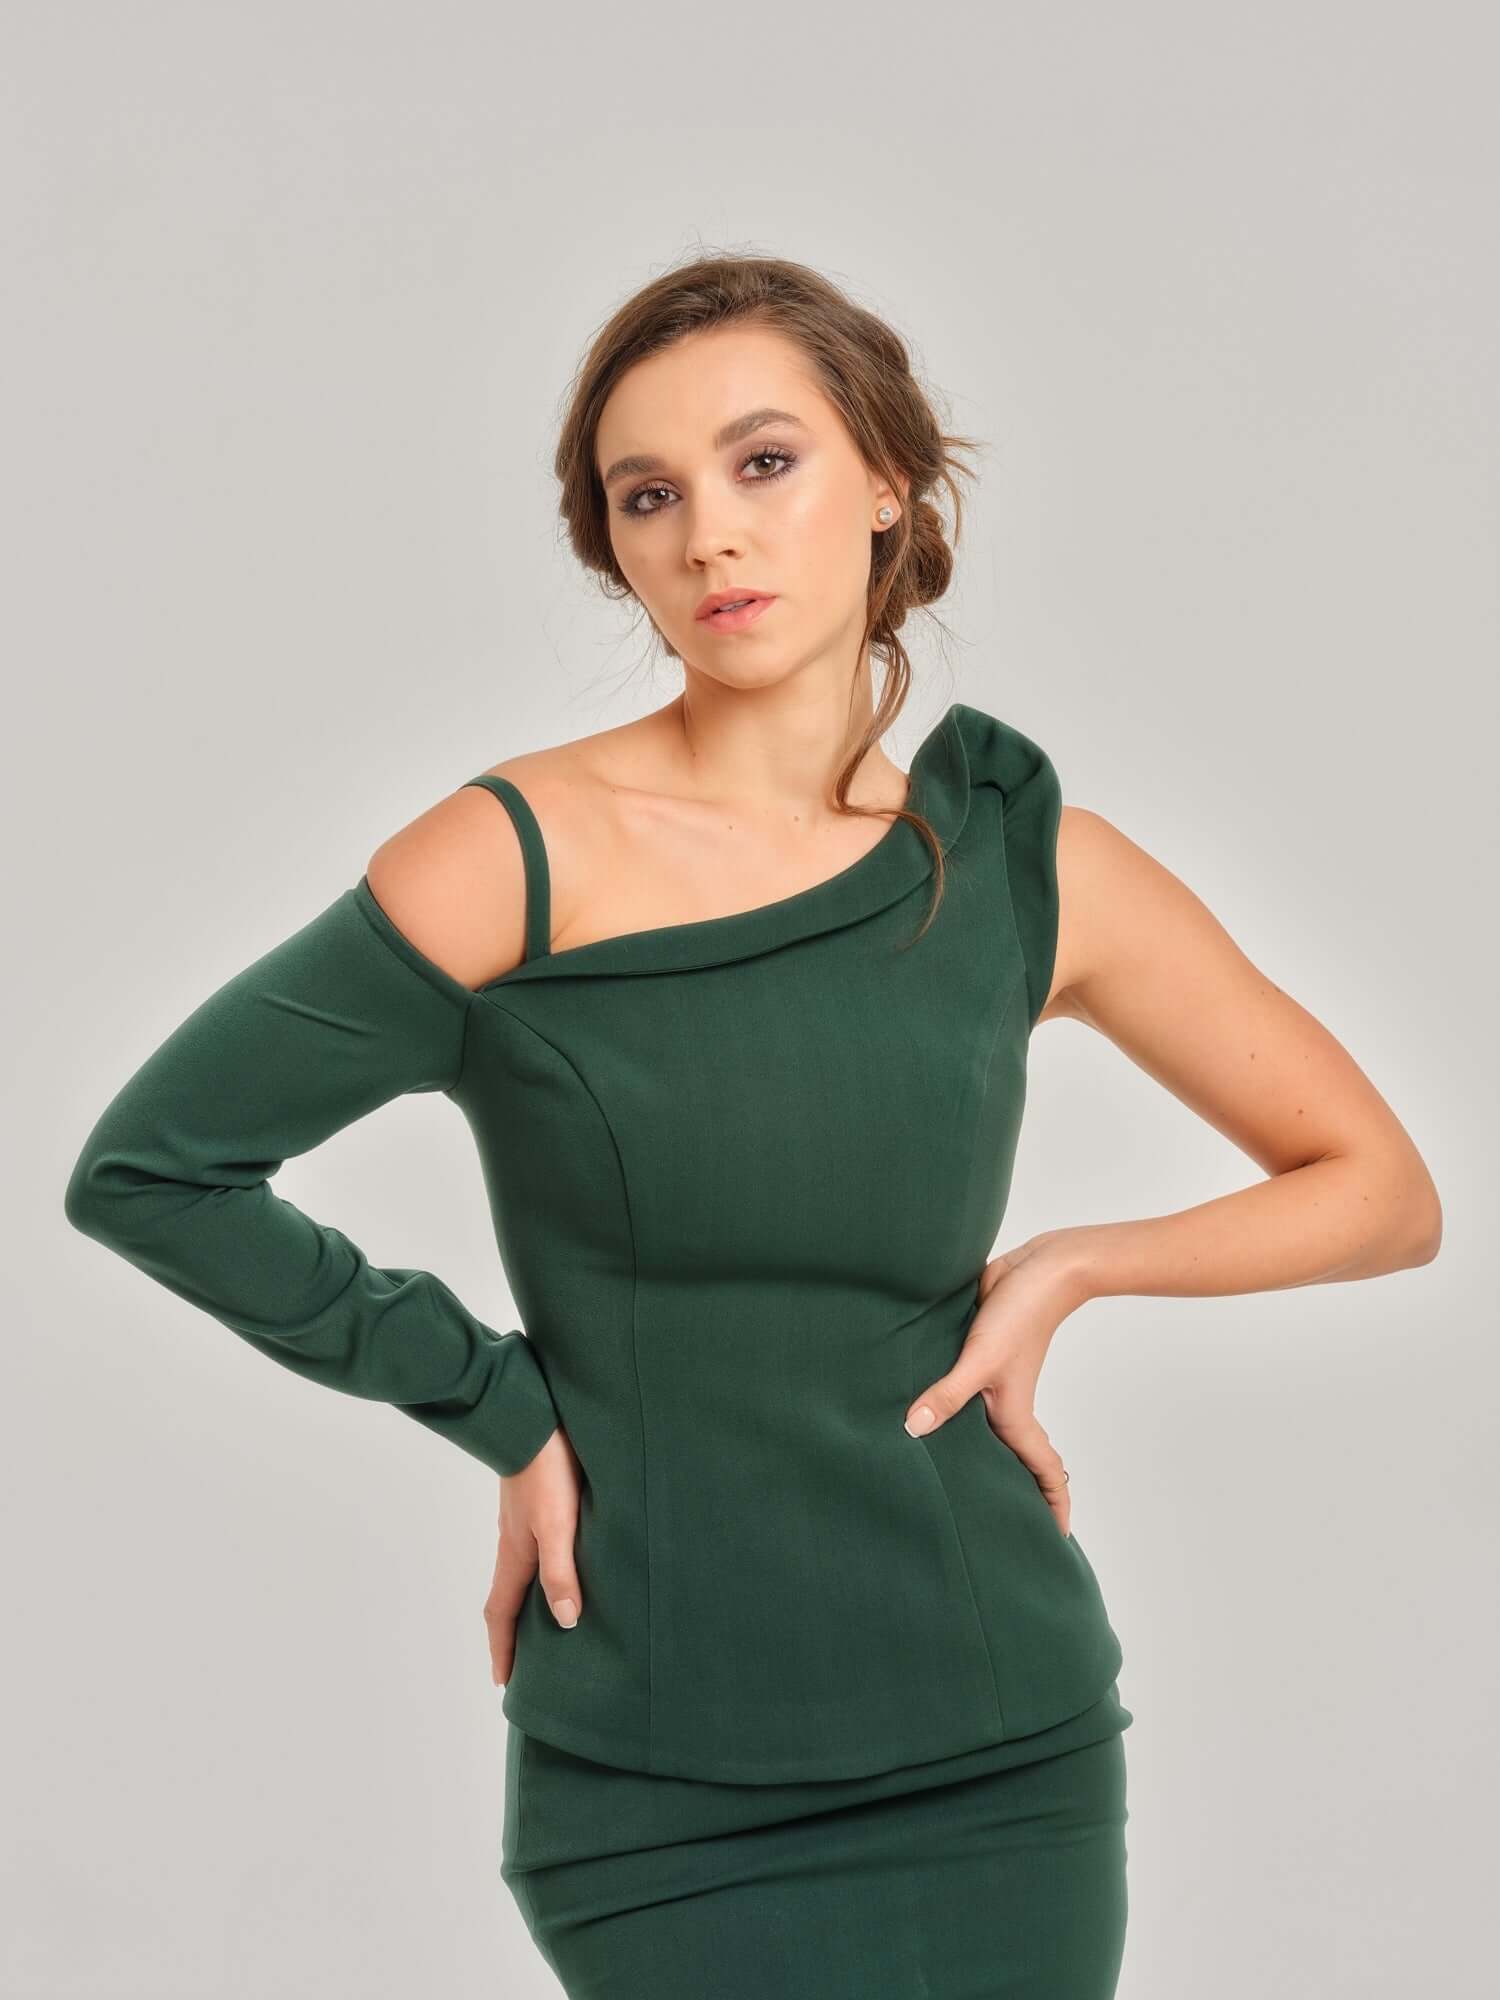 Tia Dorraine Emerald Dream Asymmetric One-Shoulder Top This incredible emerald green off-shoulder top has a single long sleeve with a tiny elegant strap, while the other shoulder includes an exciting drape going all the way across the front. Its waste-fit